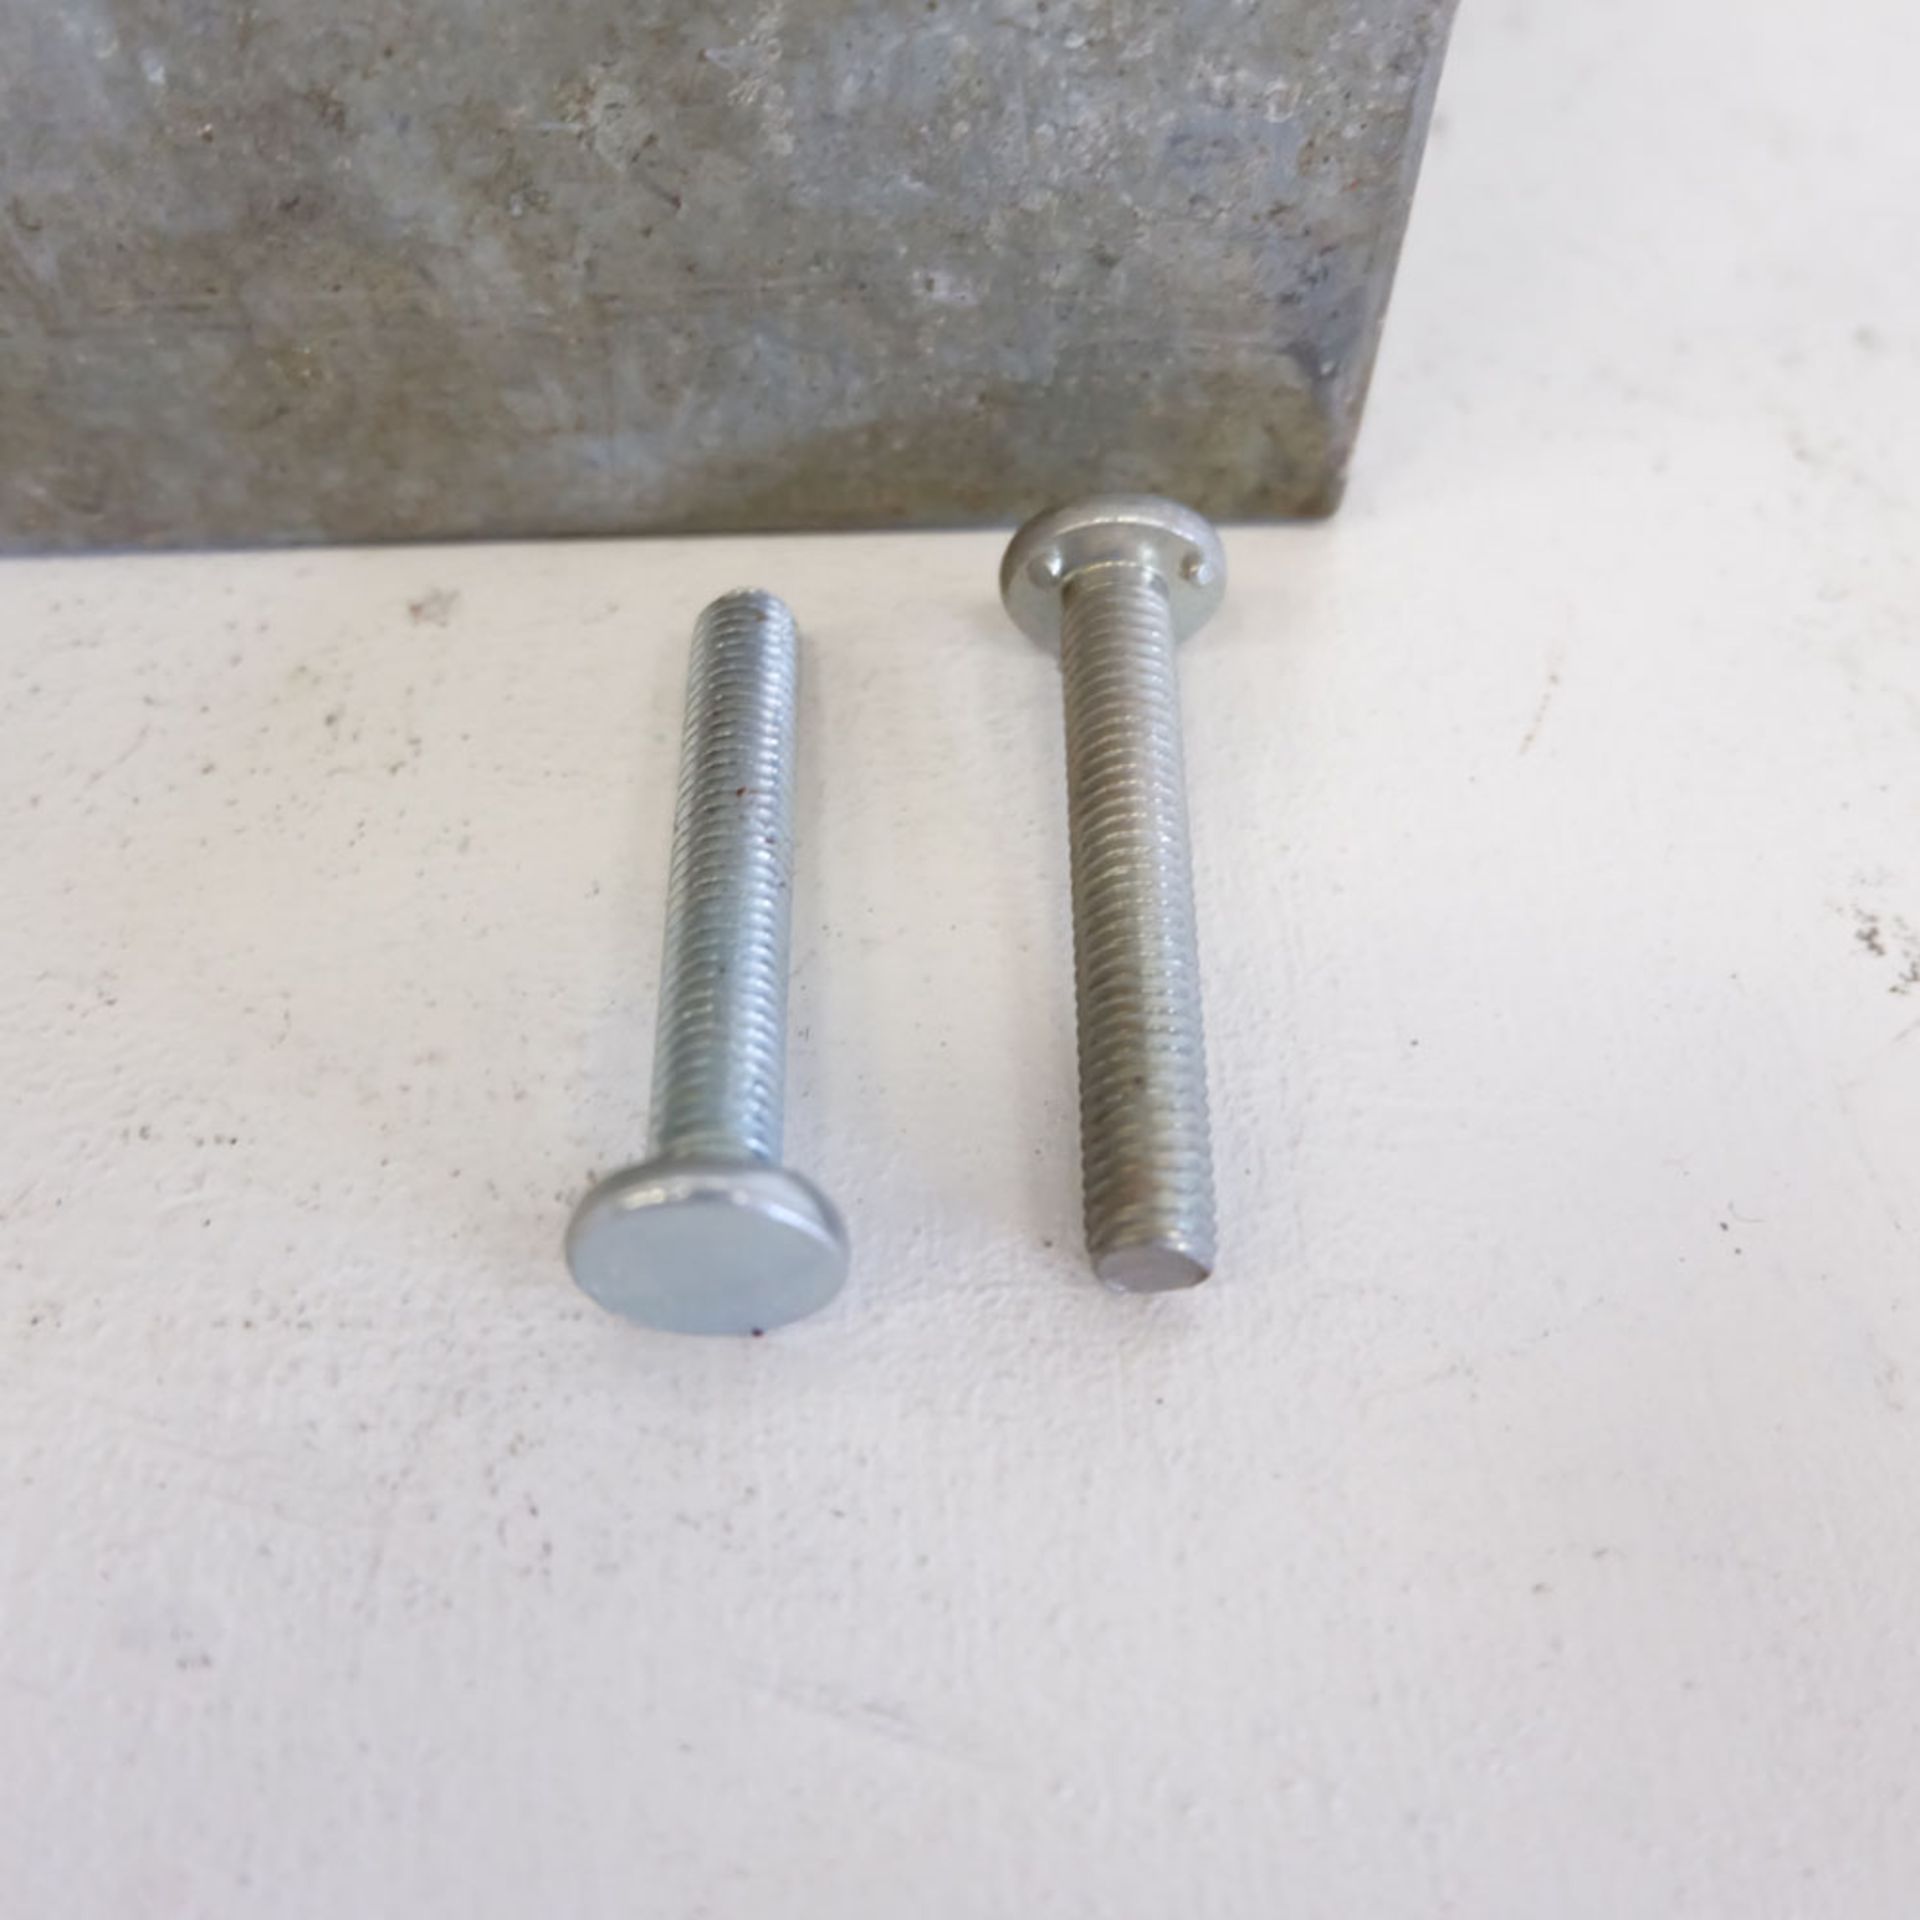 Quantity of Weld Bolts as Lotted. Labelled M8 x 50 Weld Bolt. - Image 3 of 4